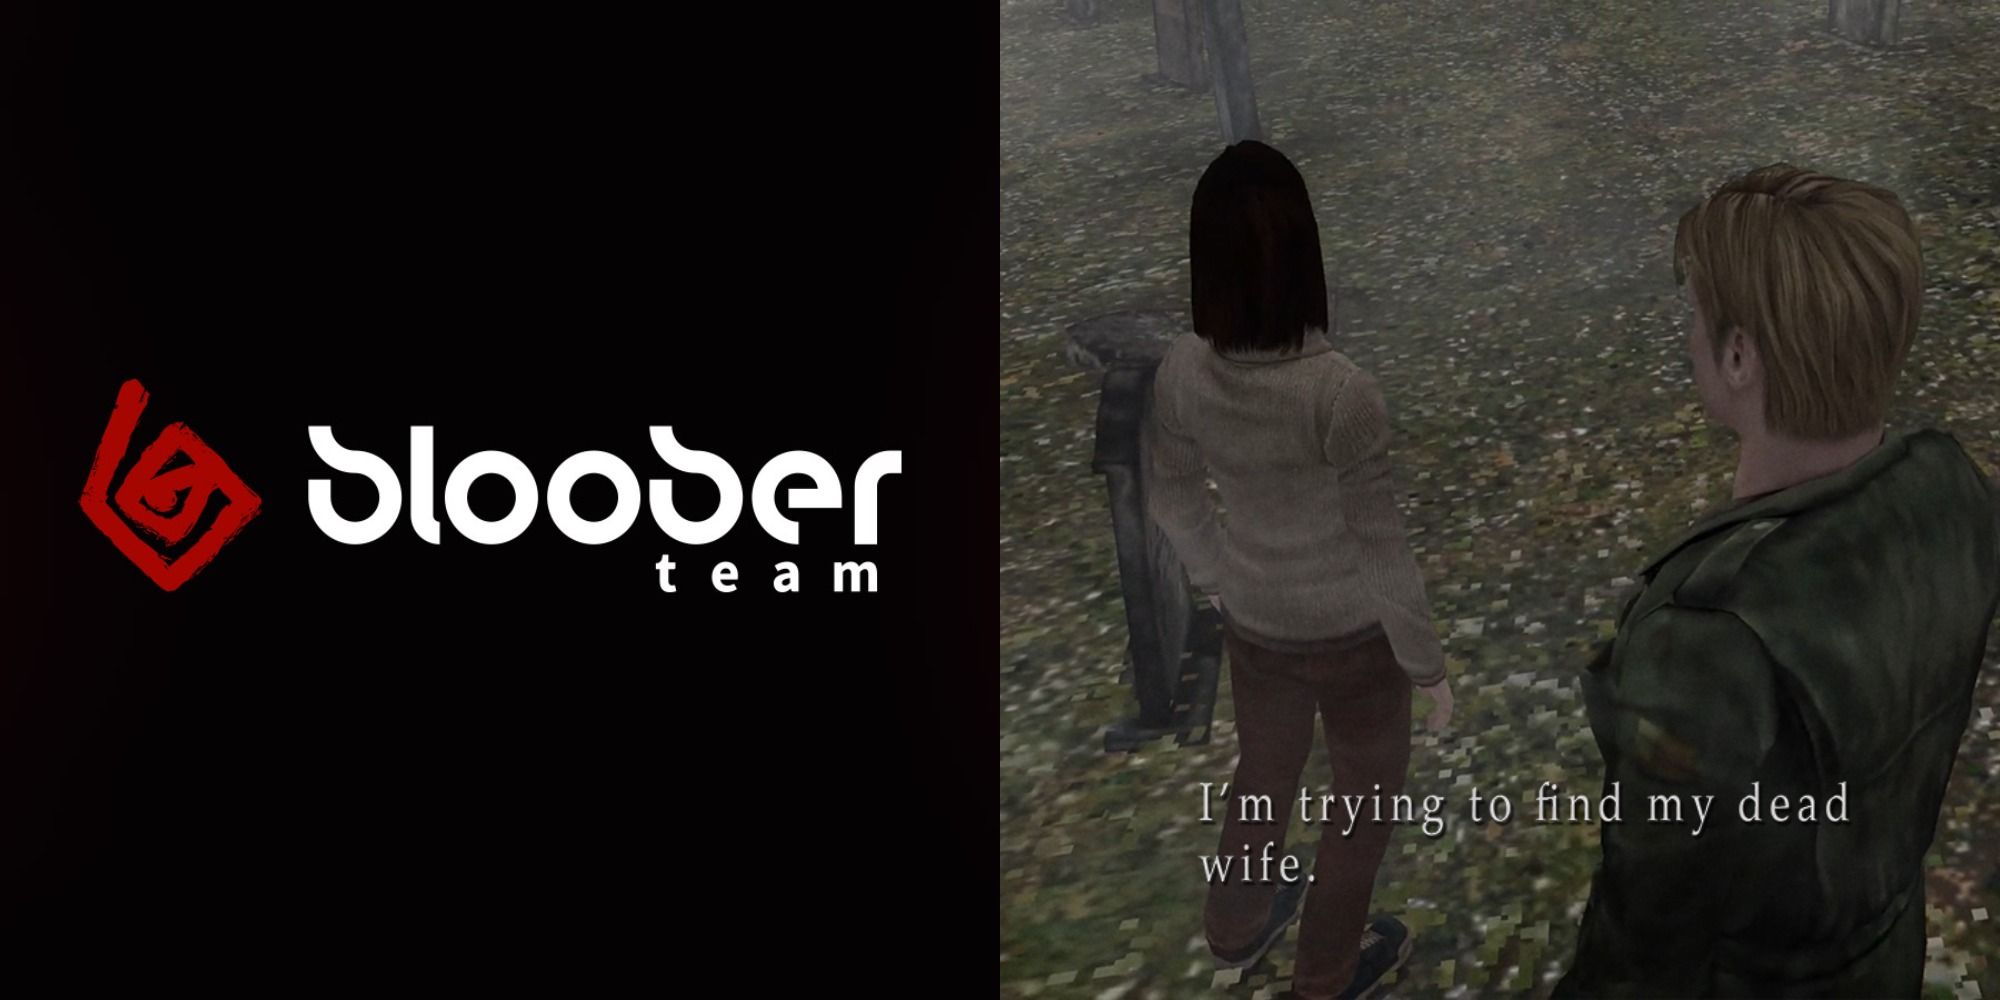 Bloober Team is done with psychological horror ahead of Silent